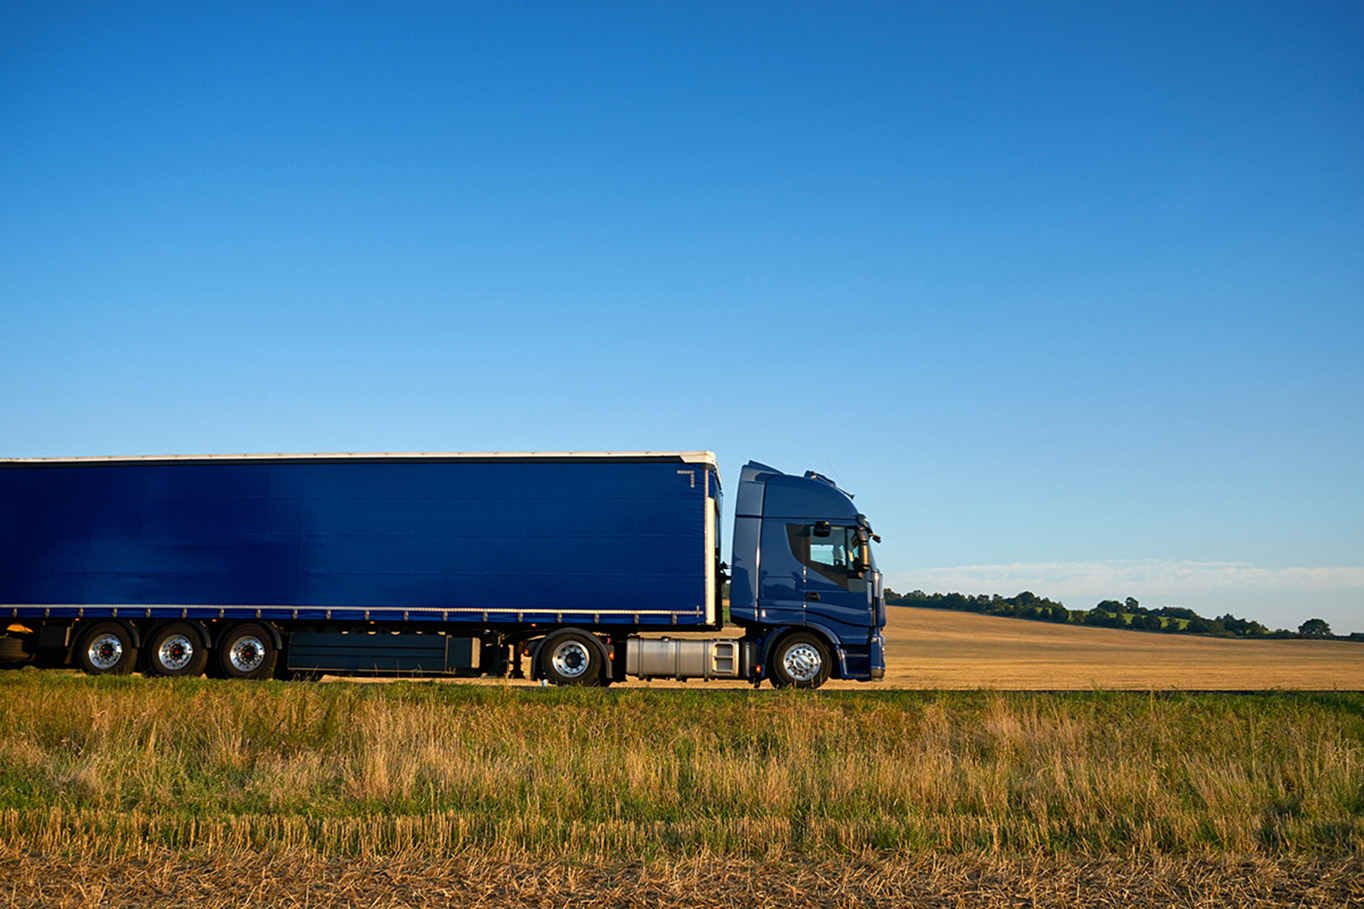 Have your say - the impact of Brexit and Covid-19 on decarbonising the UK HGV fleet